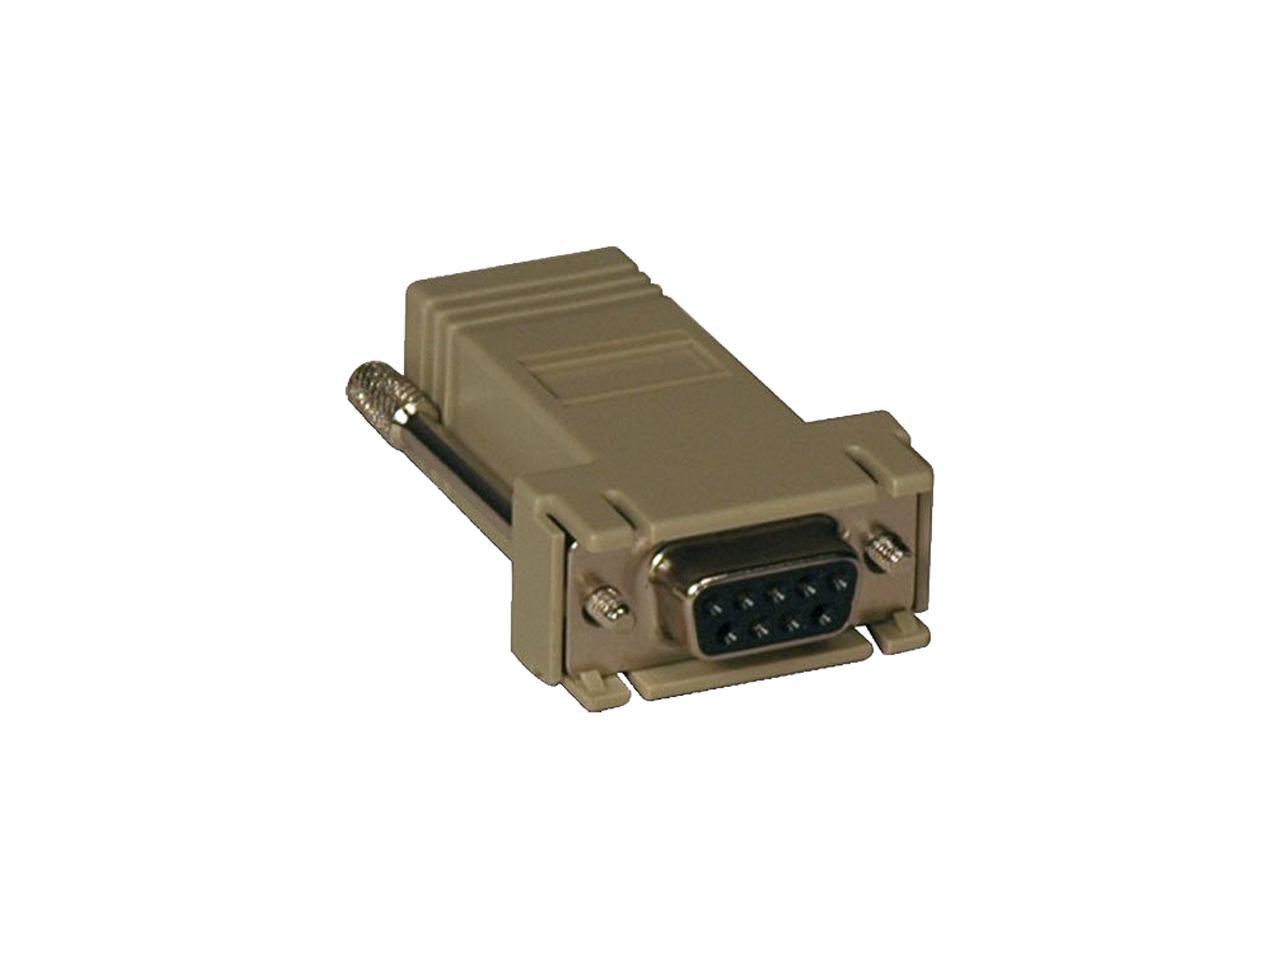 Tripp Lite B090-A9F-X Crossover Adapter RJ-45 DB9 (F) for Console Servers - image 1 of 2